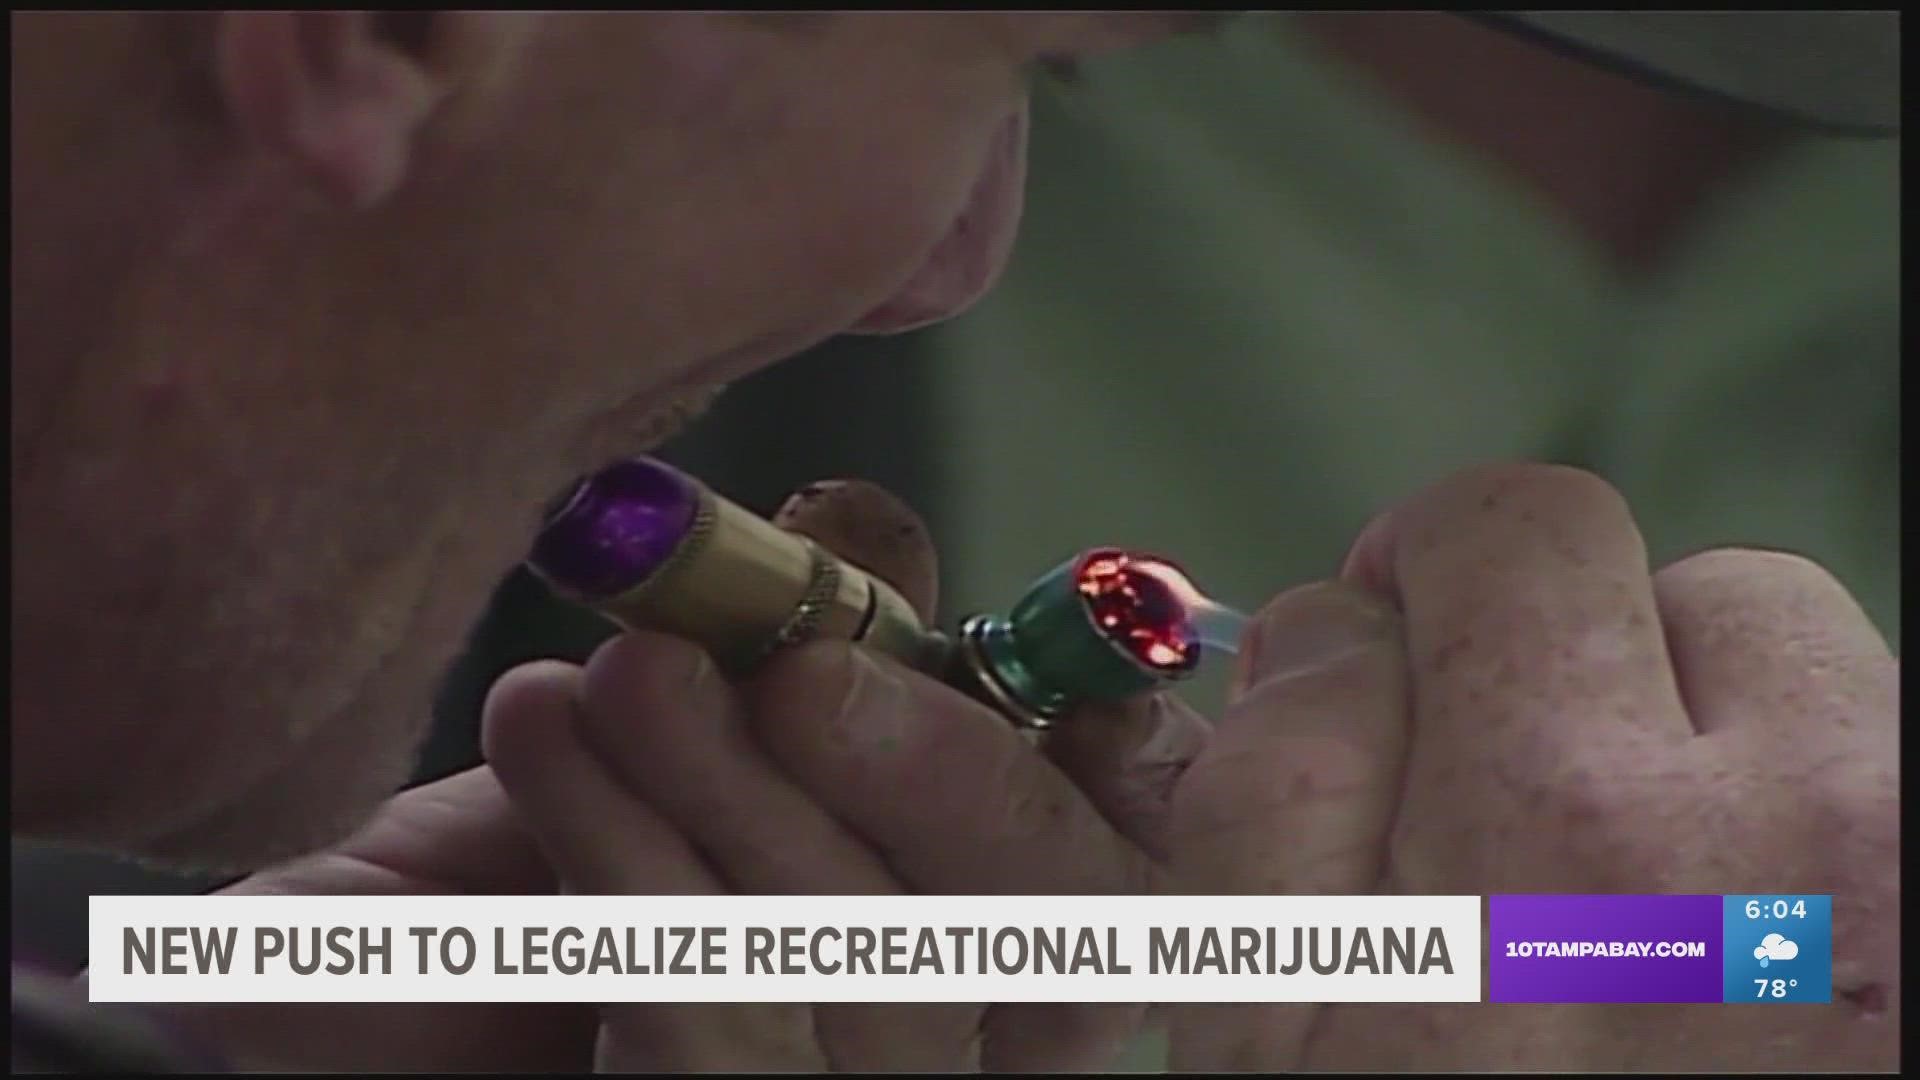 There’s a new push in the fight to legalize recreational marijuana in the state of Florida.